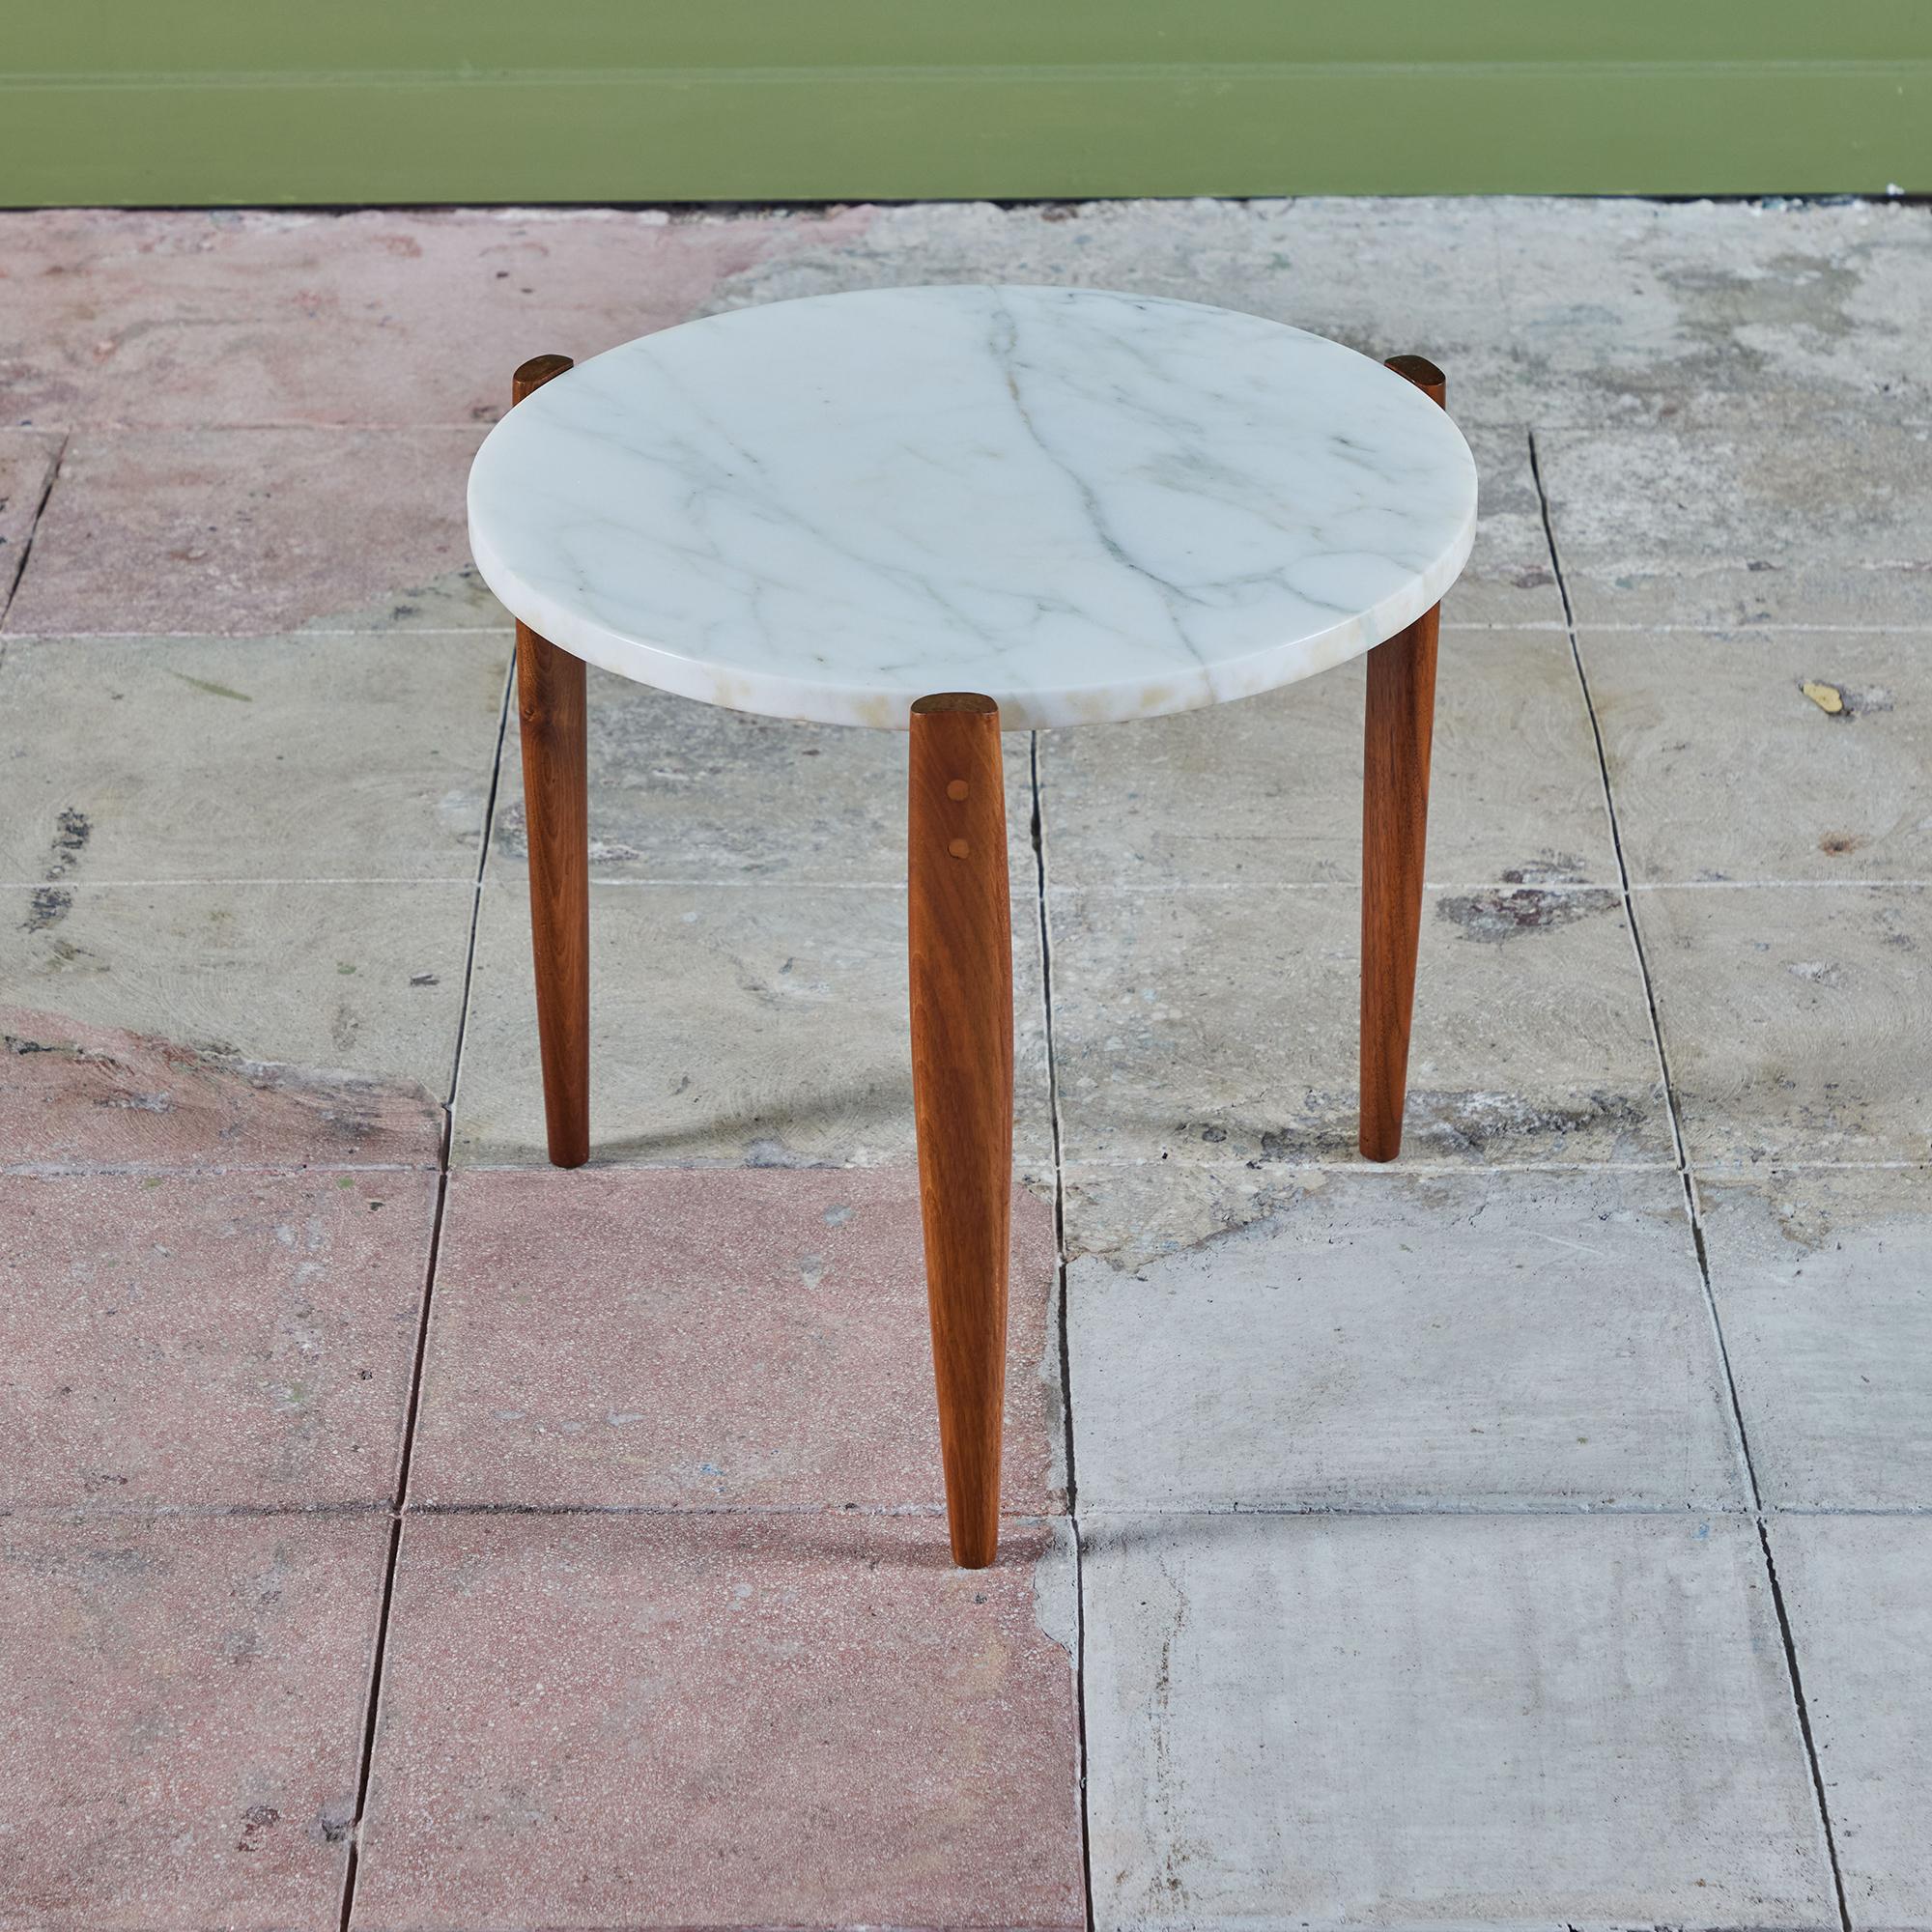 Marble top side table with a walnut tripod base. The table features a removable round table top which rests on a tapered three legged walnut base. 

Dimensions
18.75